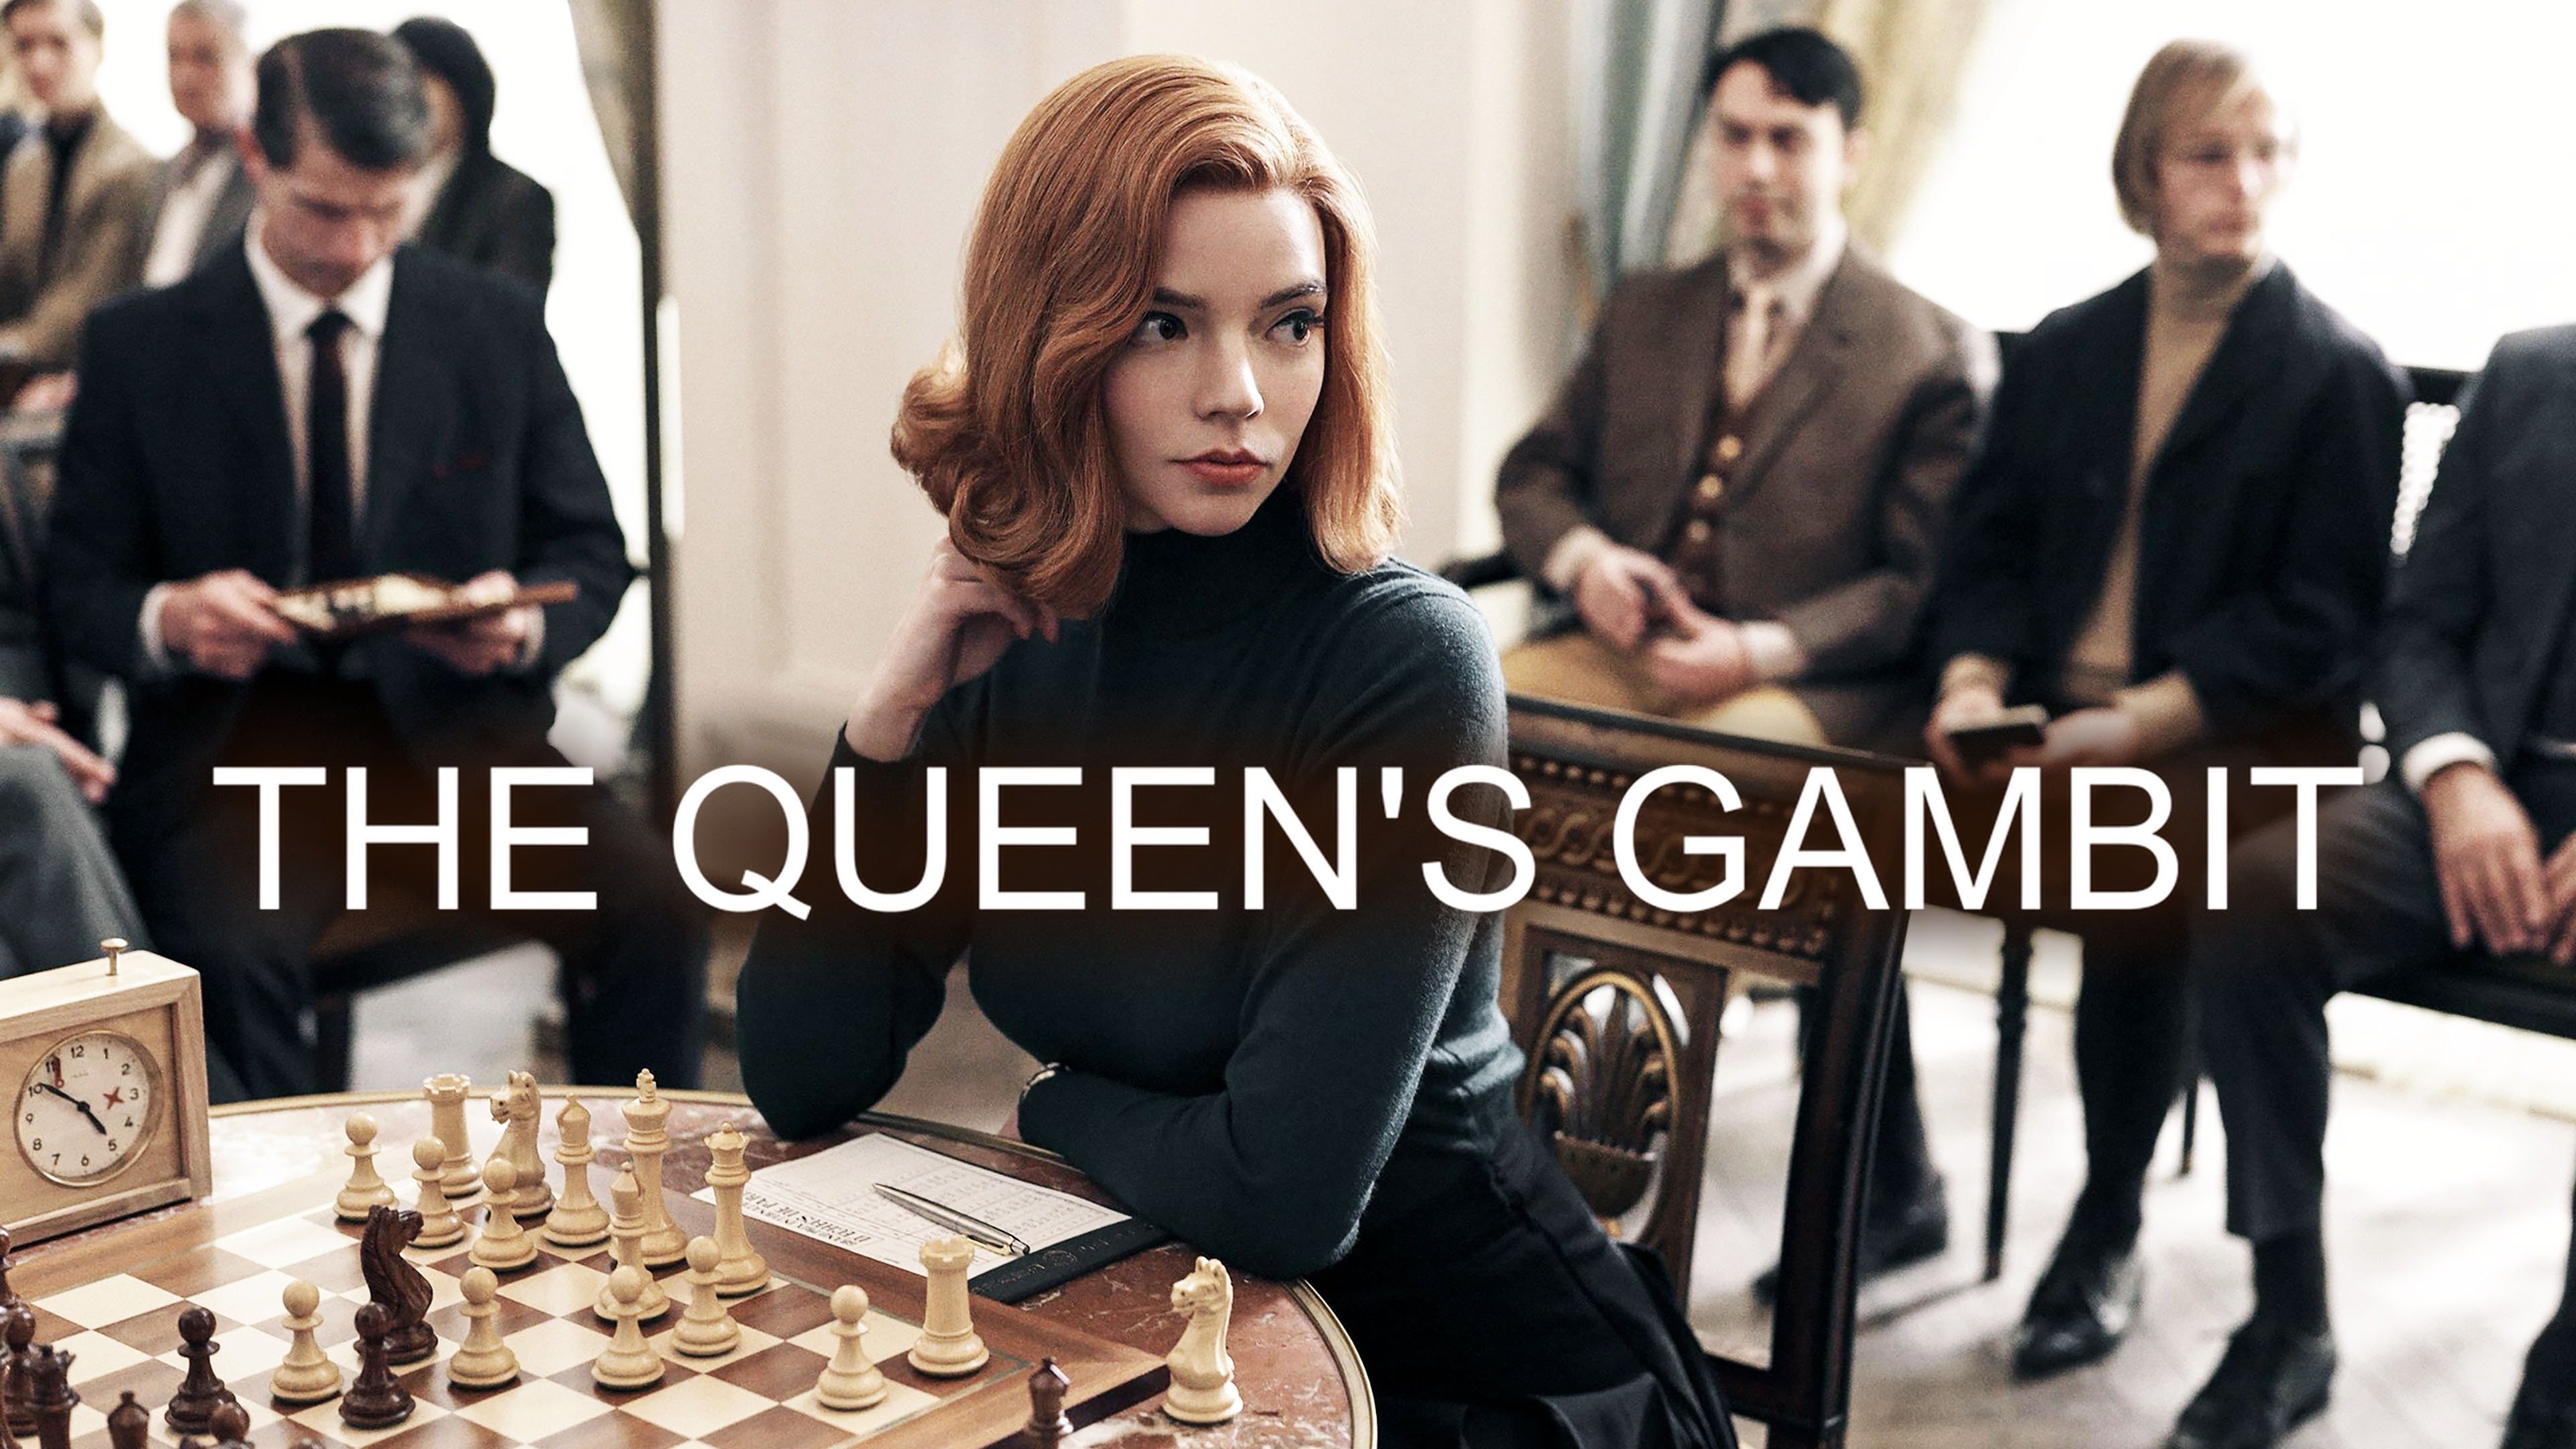 The Queen's Gambit - Trailers & Videos - Rotten Tomatoes